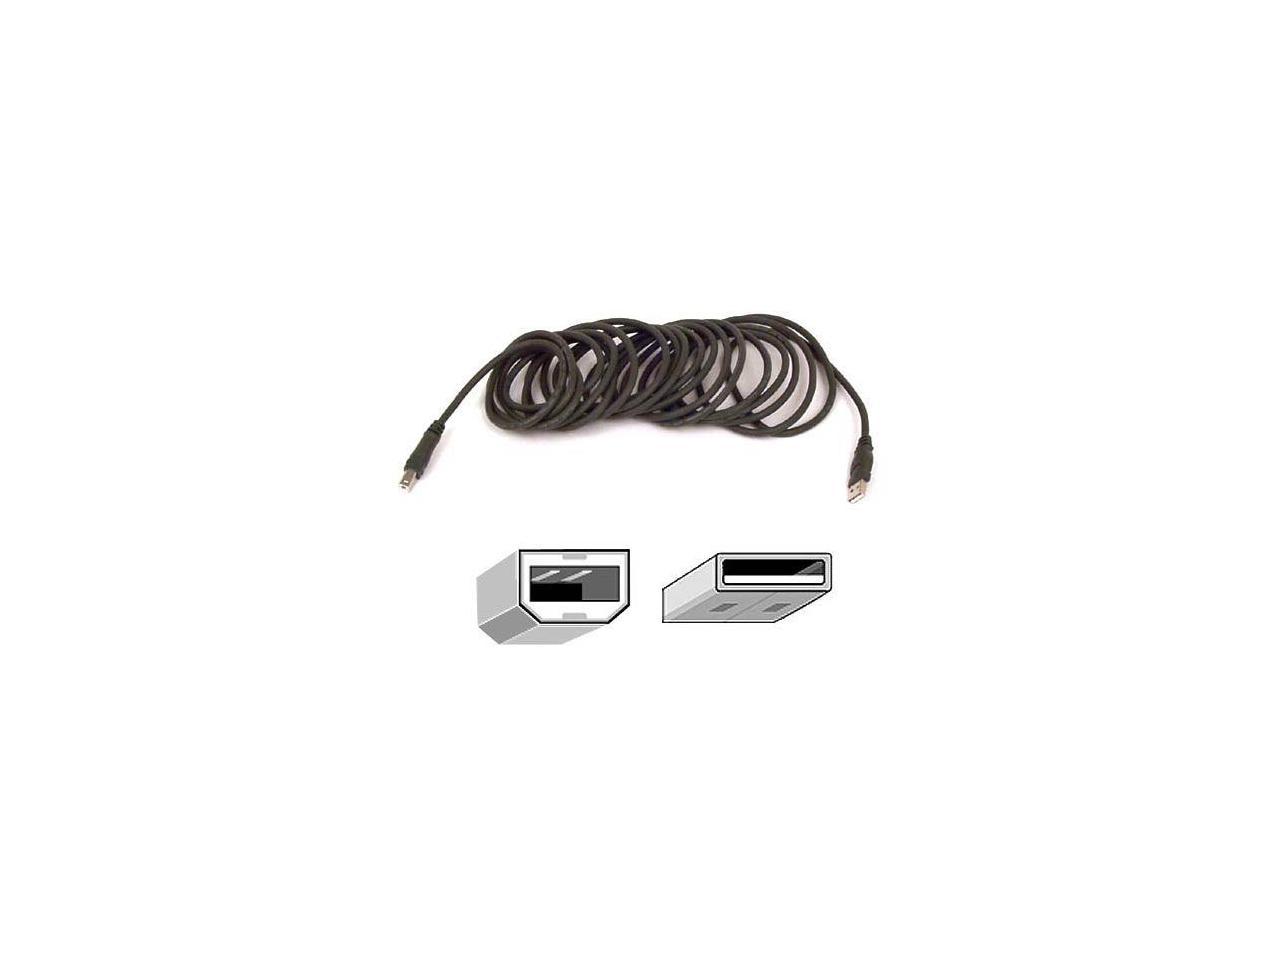 Belkin F3U133B10 10 ft. Hi-Speed Type A Male USB 2.0 to Type B Male USB 2.0 Cable - image 1 of 3